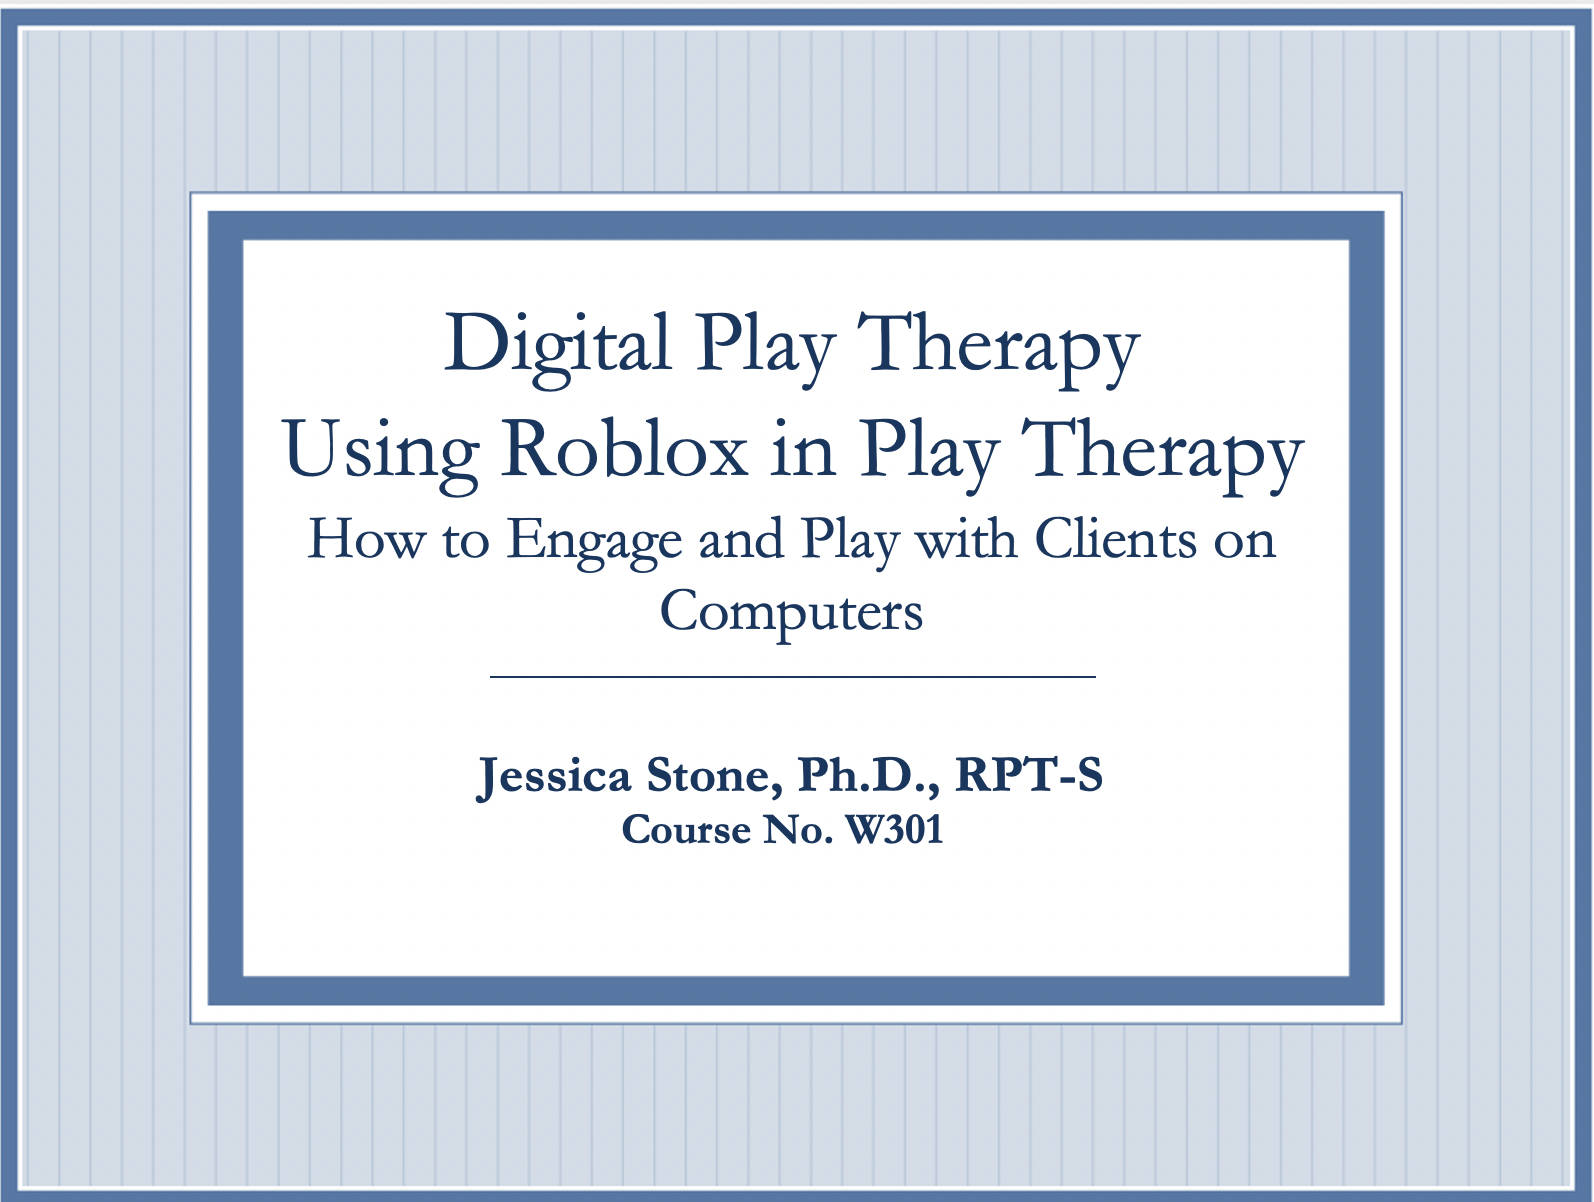 Digital Play Therapy Using Roblox In Play Therapy - roblox google+